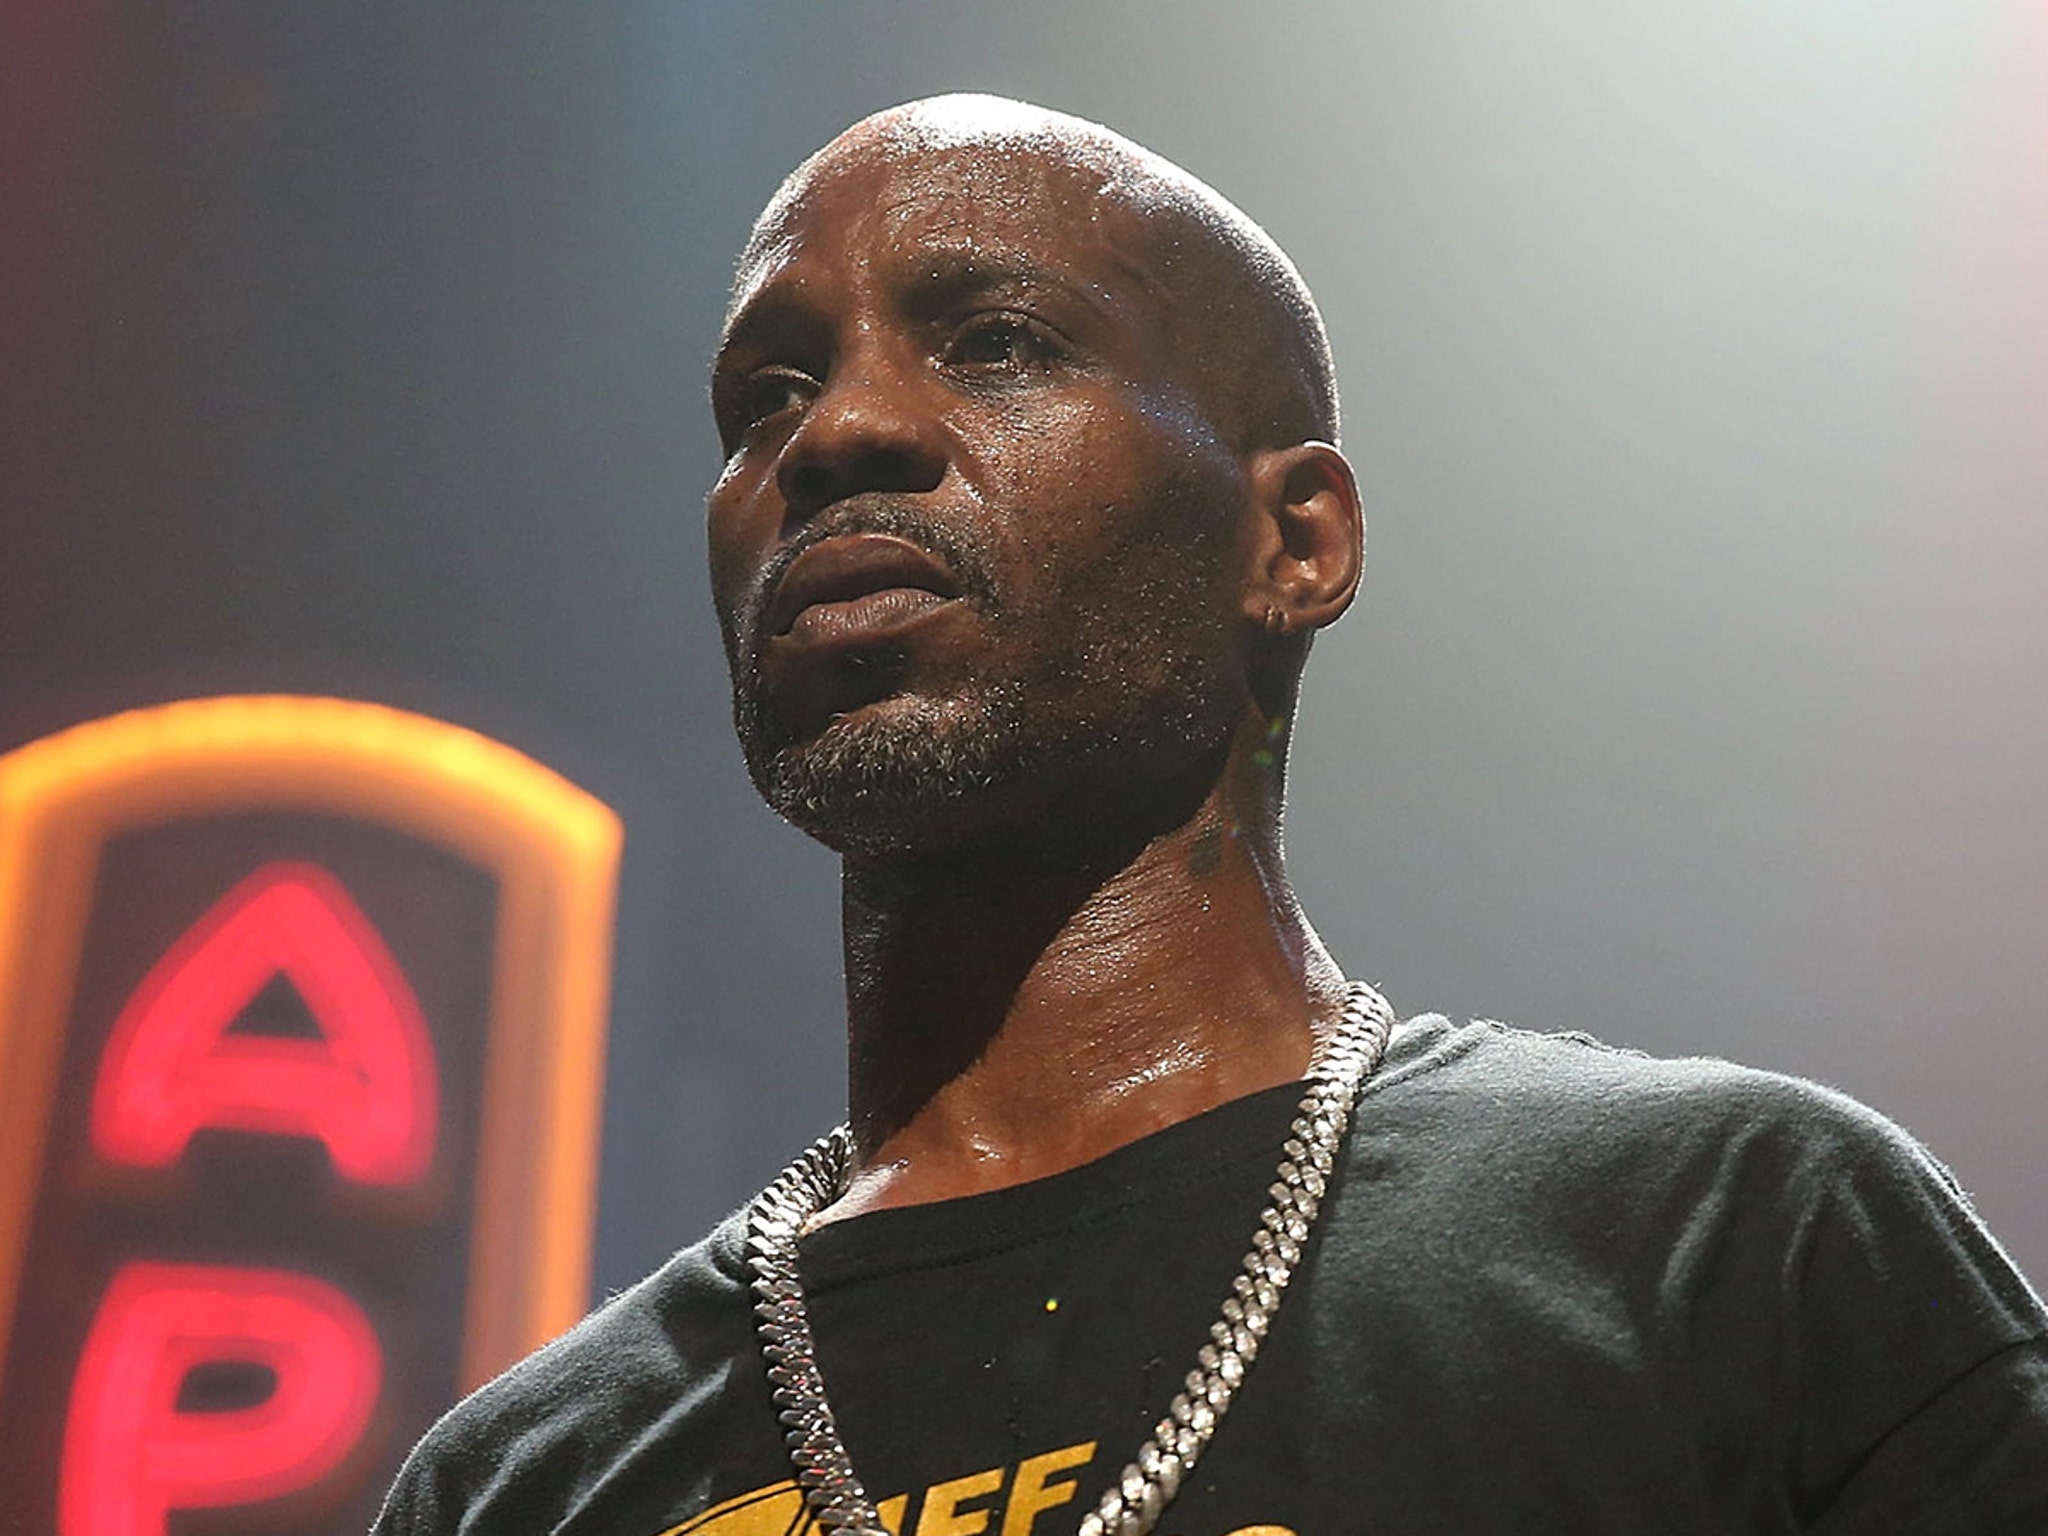 Remembering DMX, Who Changed Rap Forever